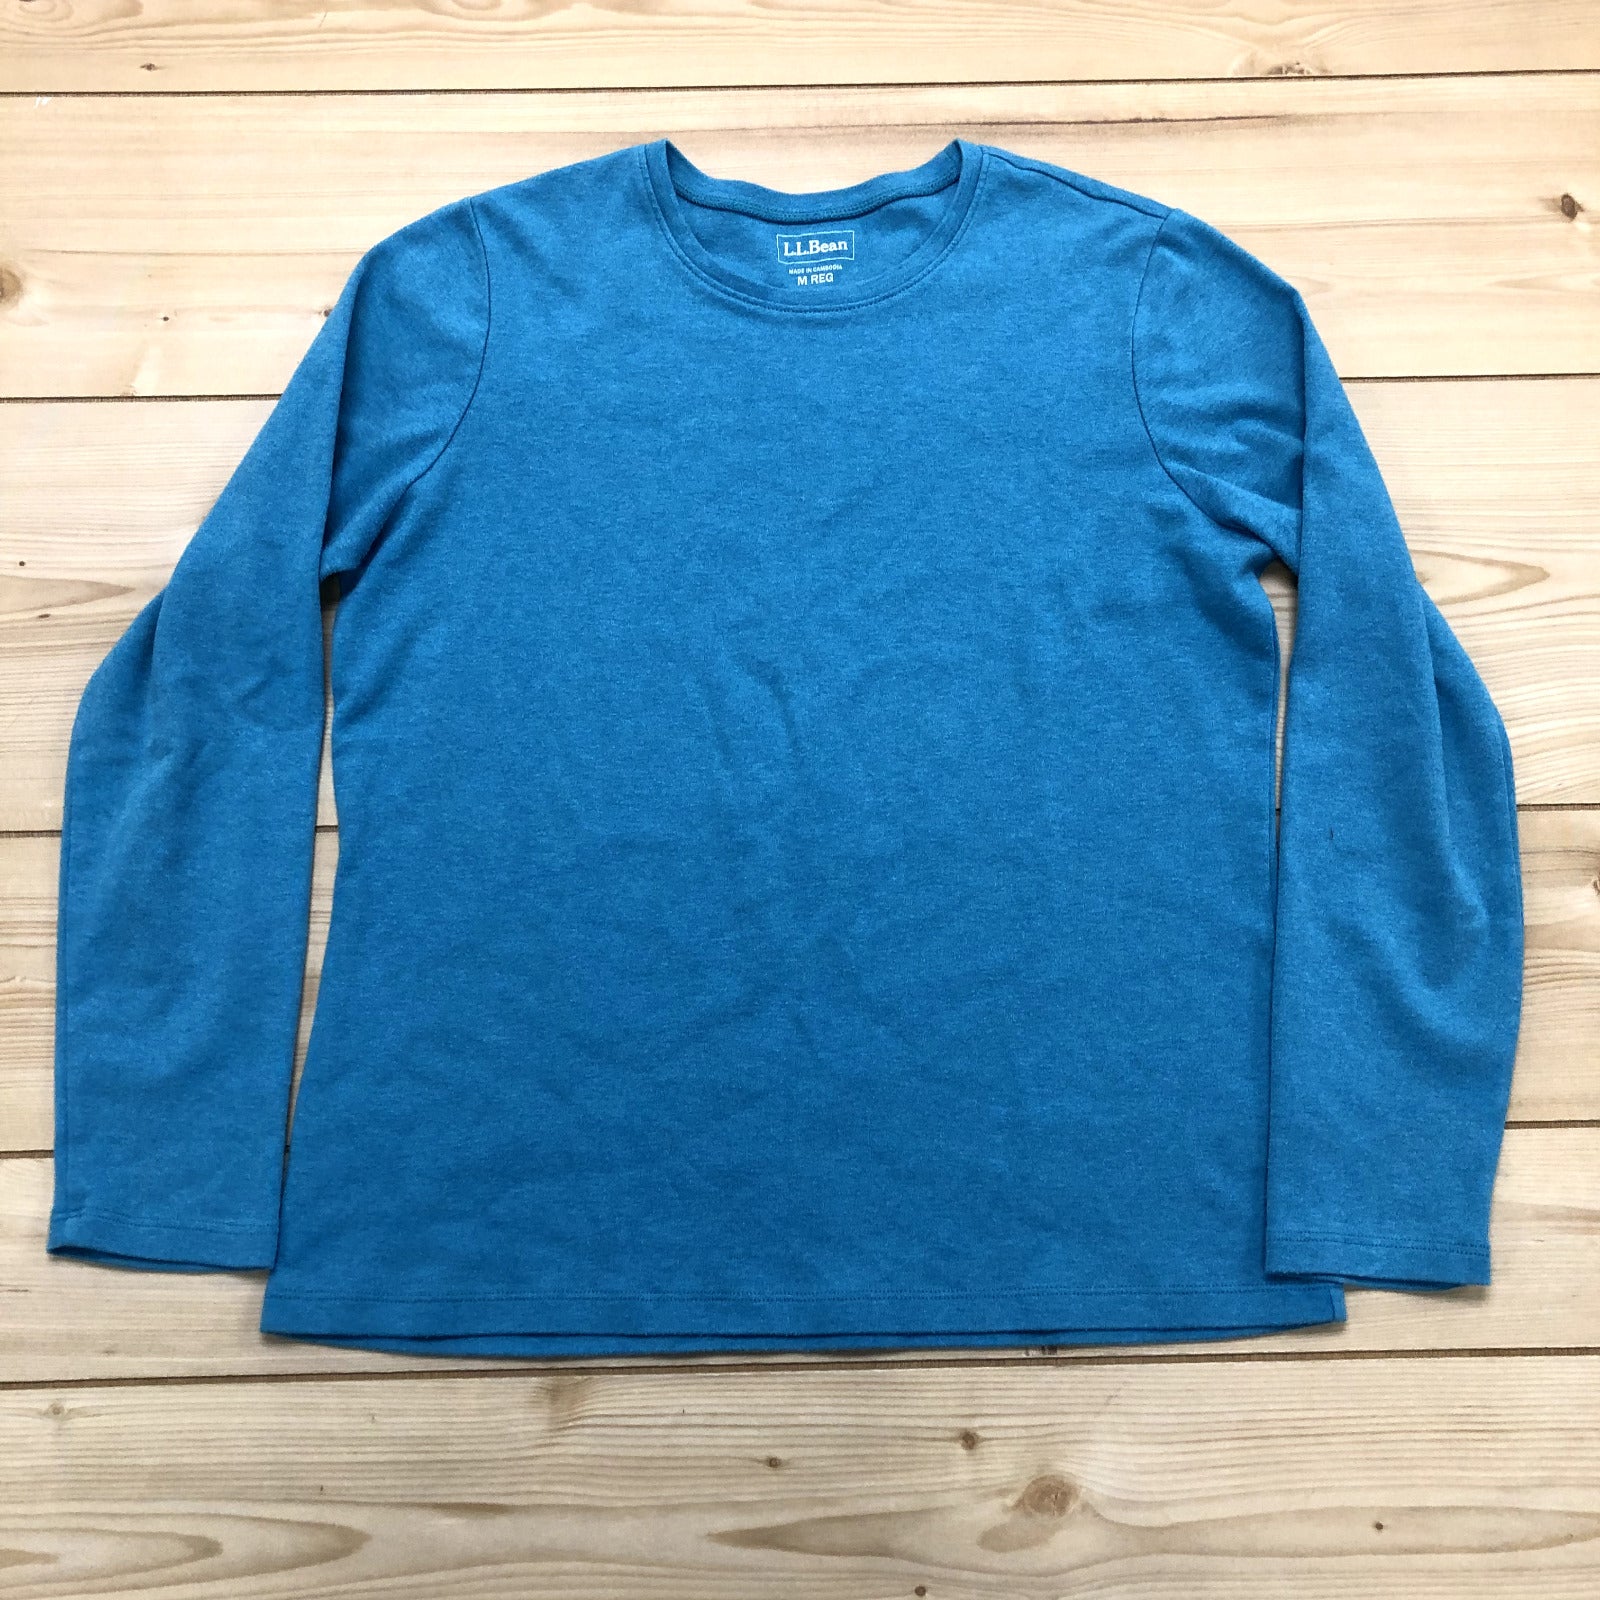 L.L. Bean Blue Solid Crew Neck Long Sleeve Pullover T-Shirt Adult Size M REG